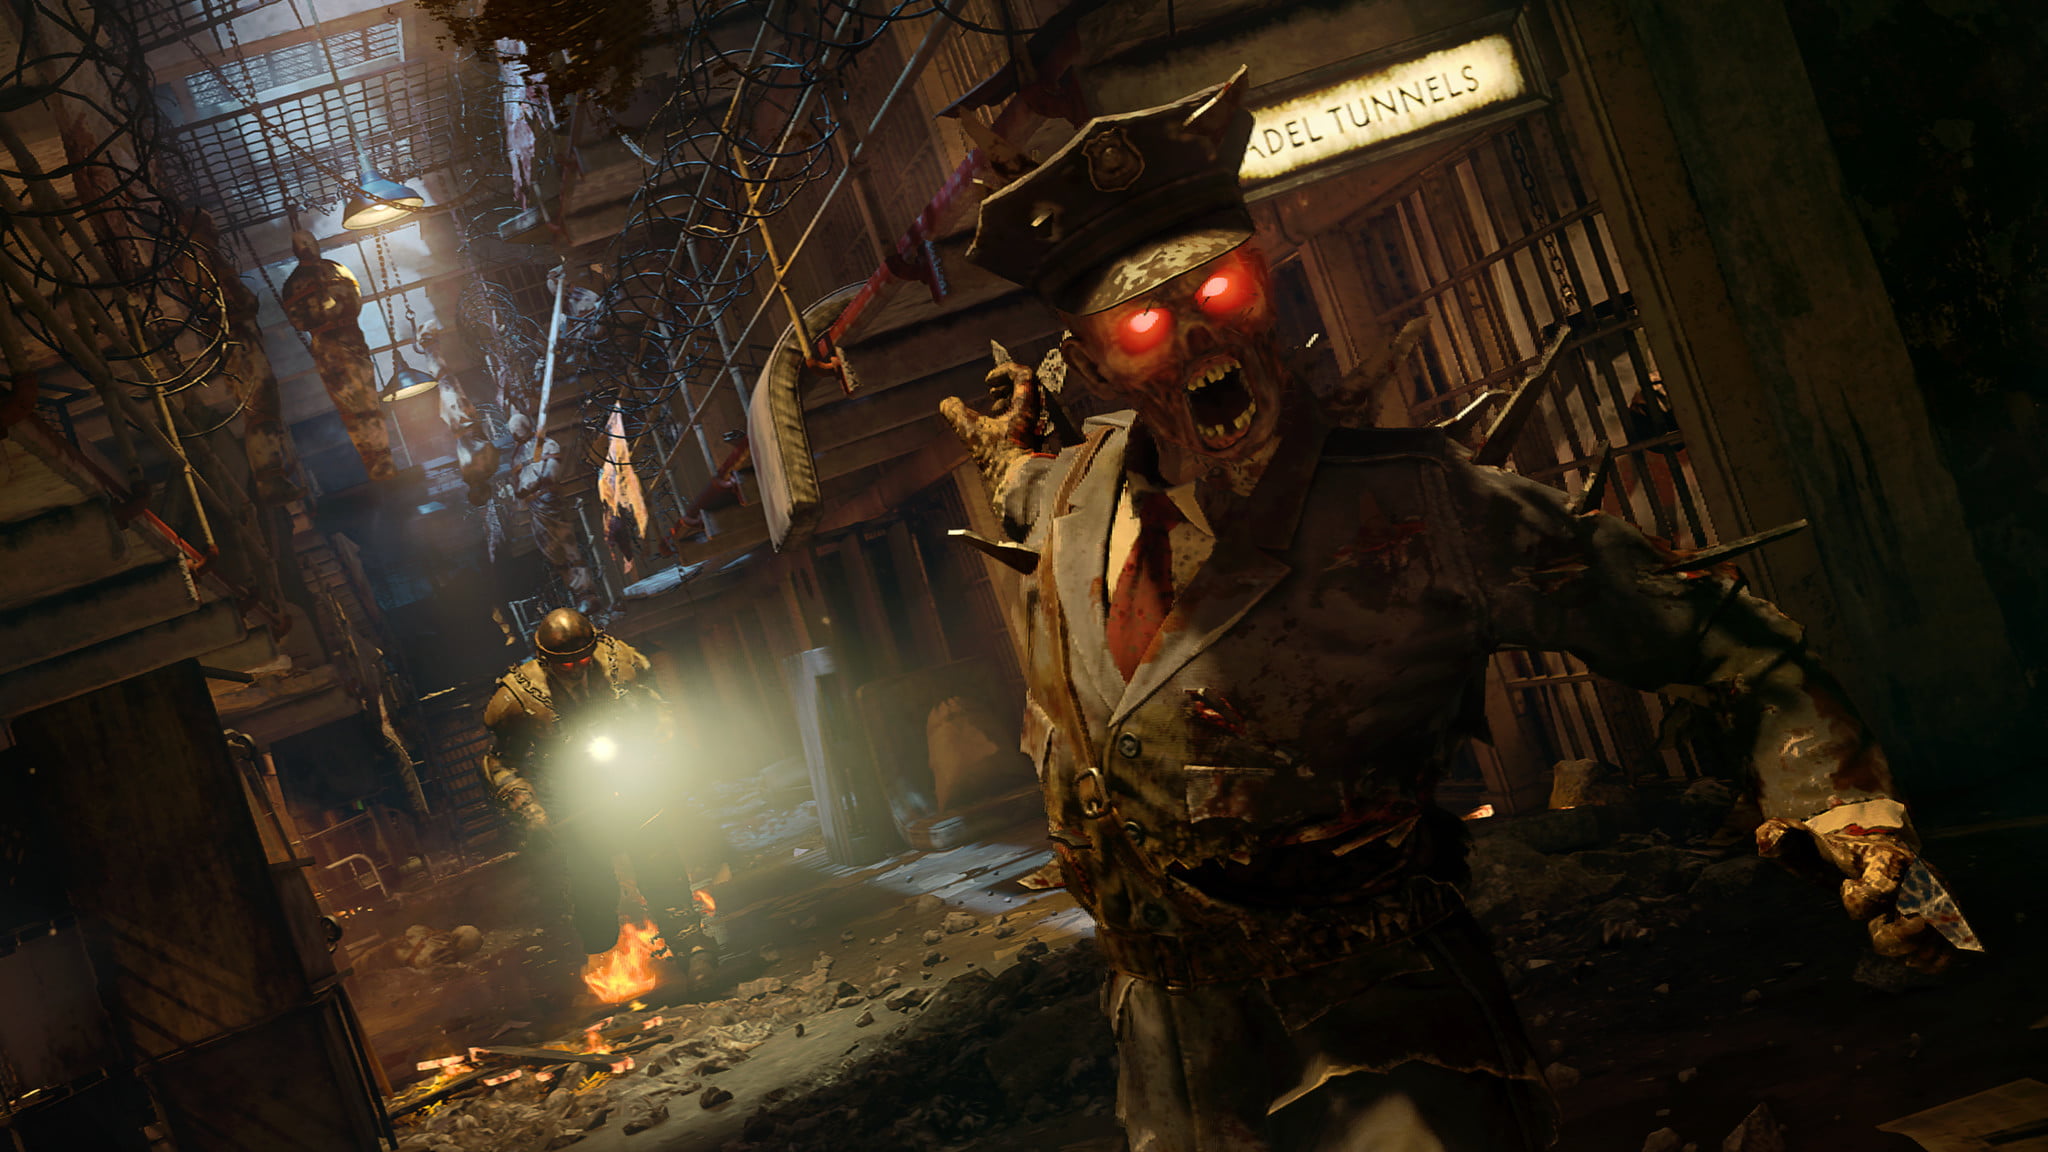 Zombies Mode Will Be Present in CALL OF DUTY: BLACK OPS 4 — GameTyrant